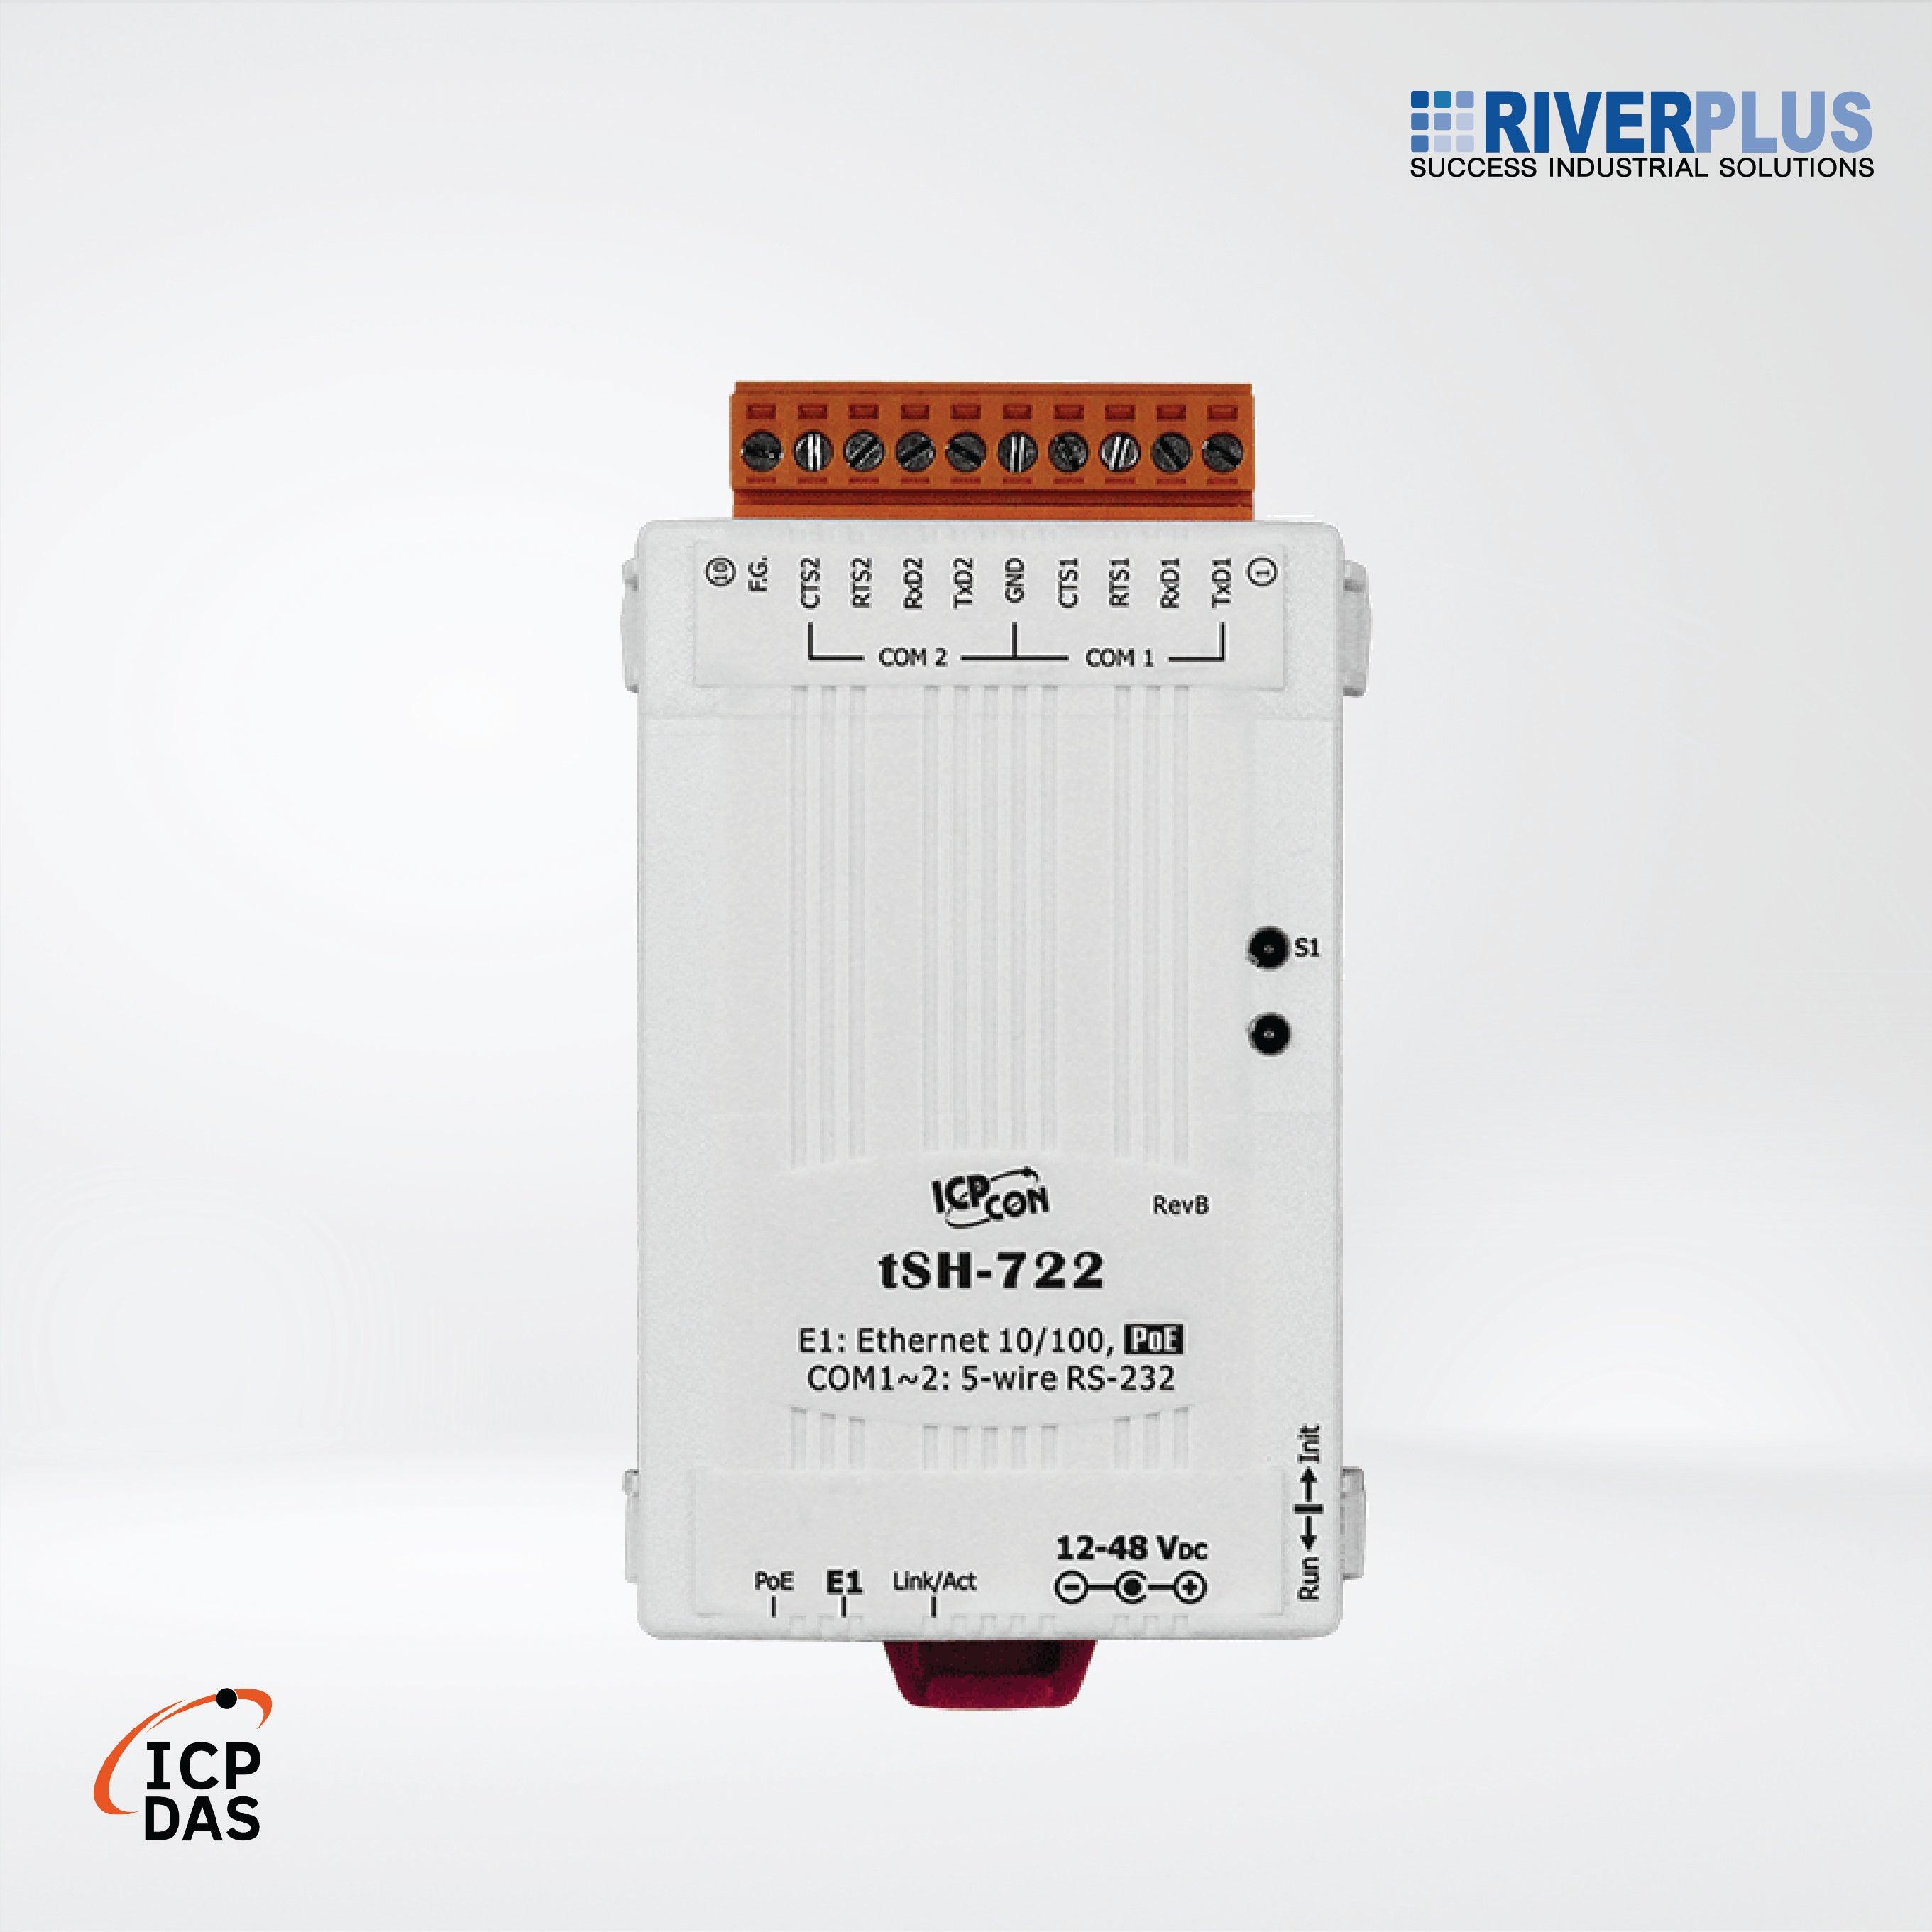 tSH-722 Tiny (2x RS-232) Serial Port Converter with PoE - Riverplus